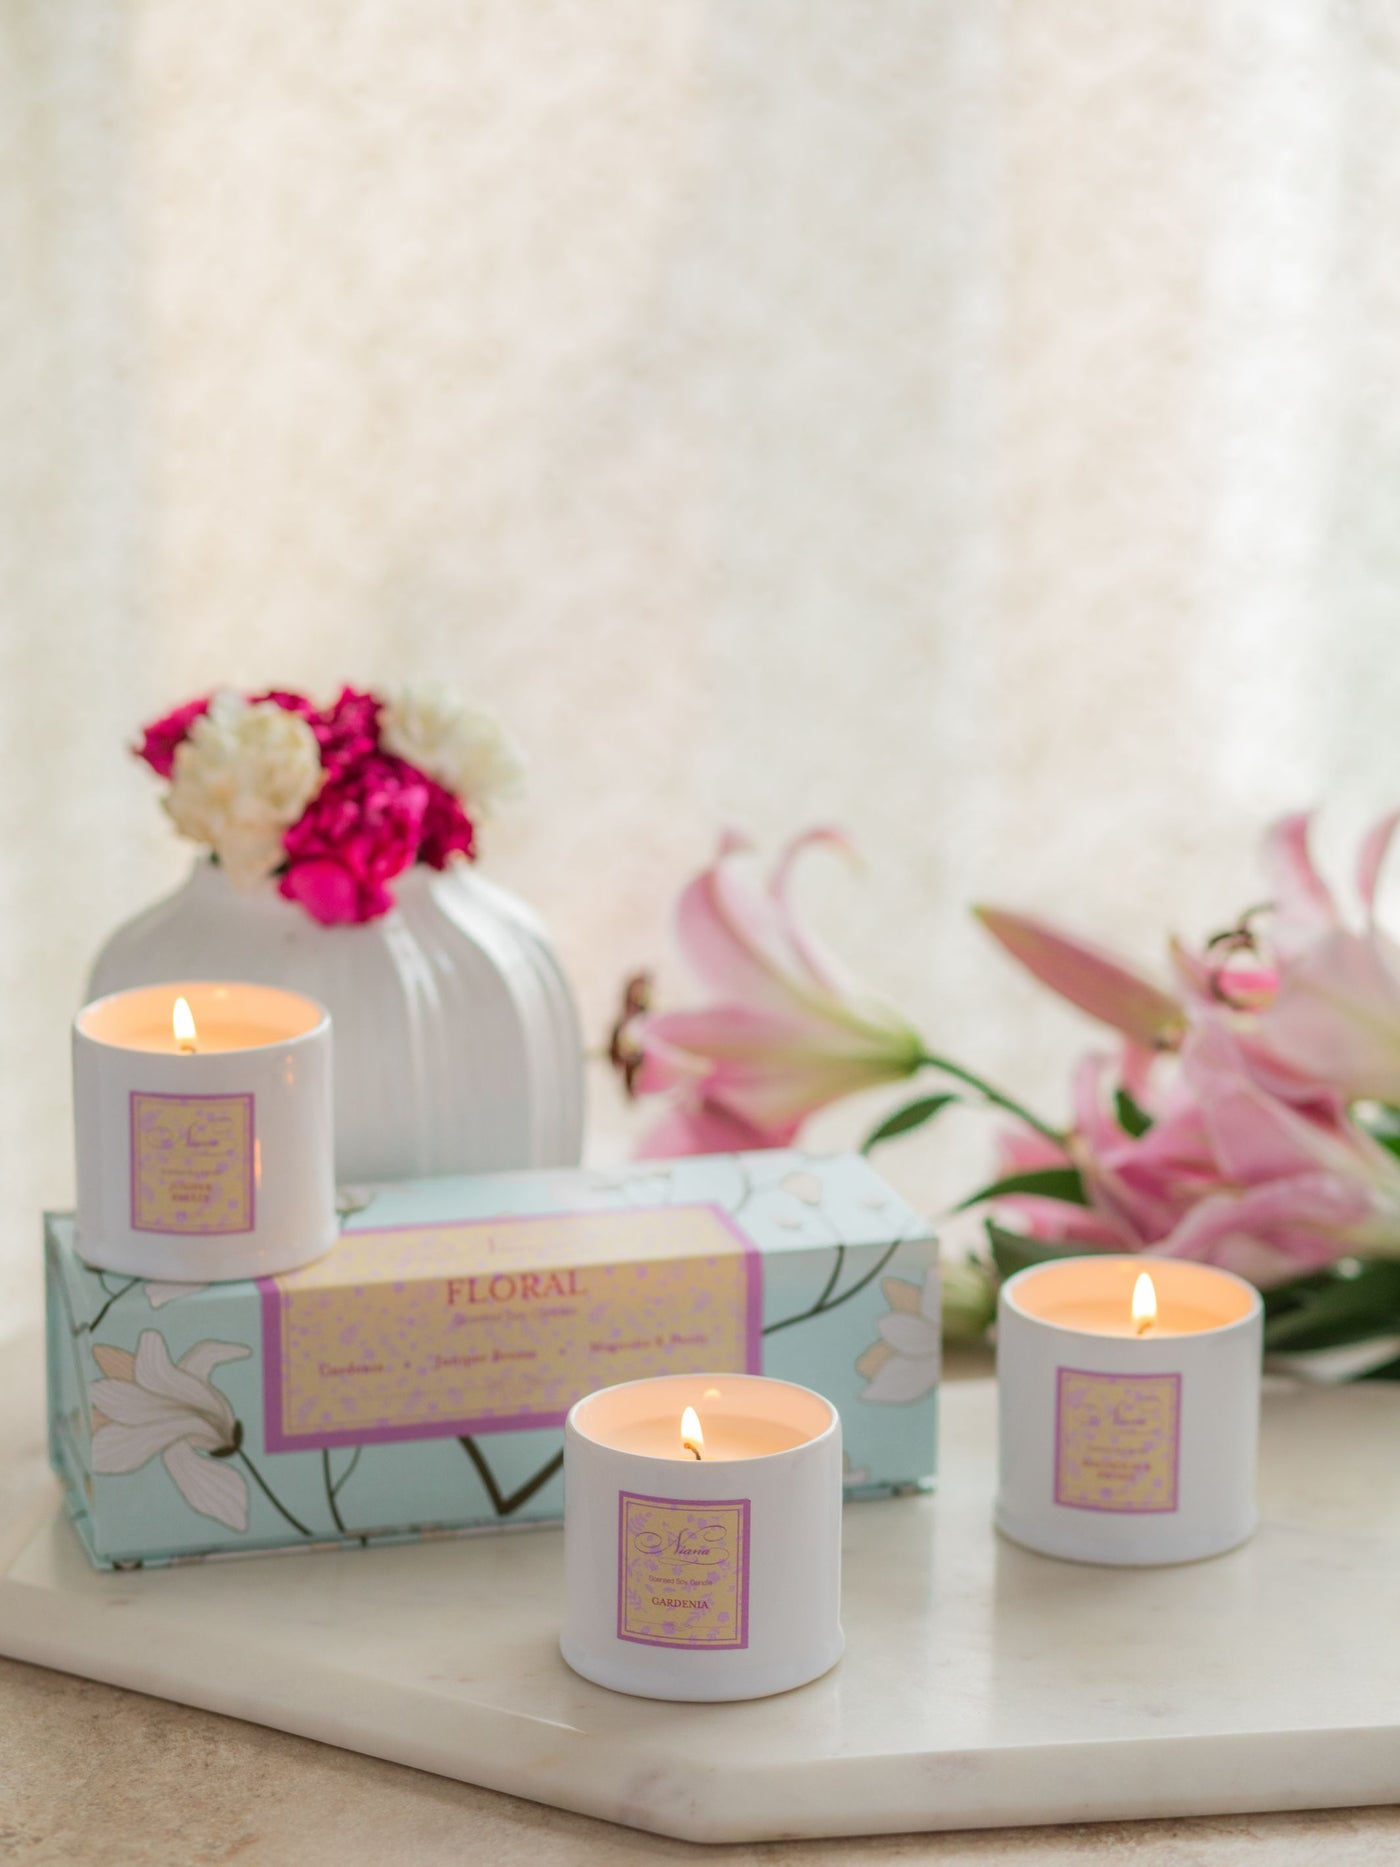 Floral Collection - Set of 3 Candles